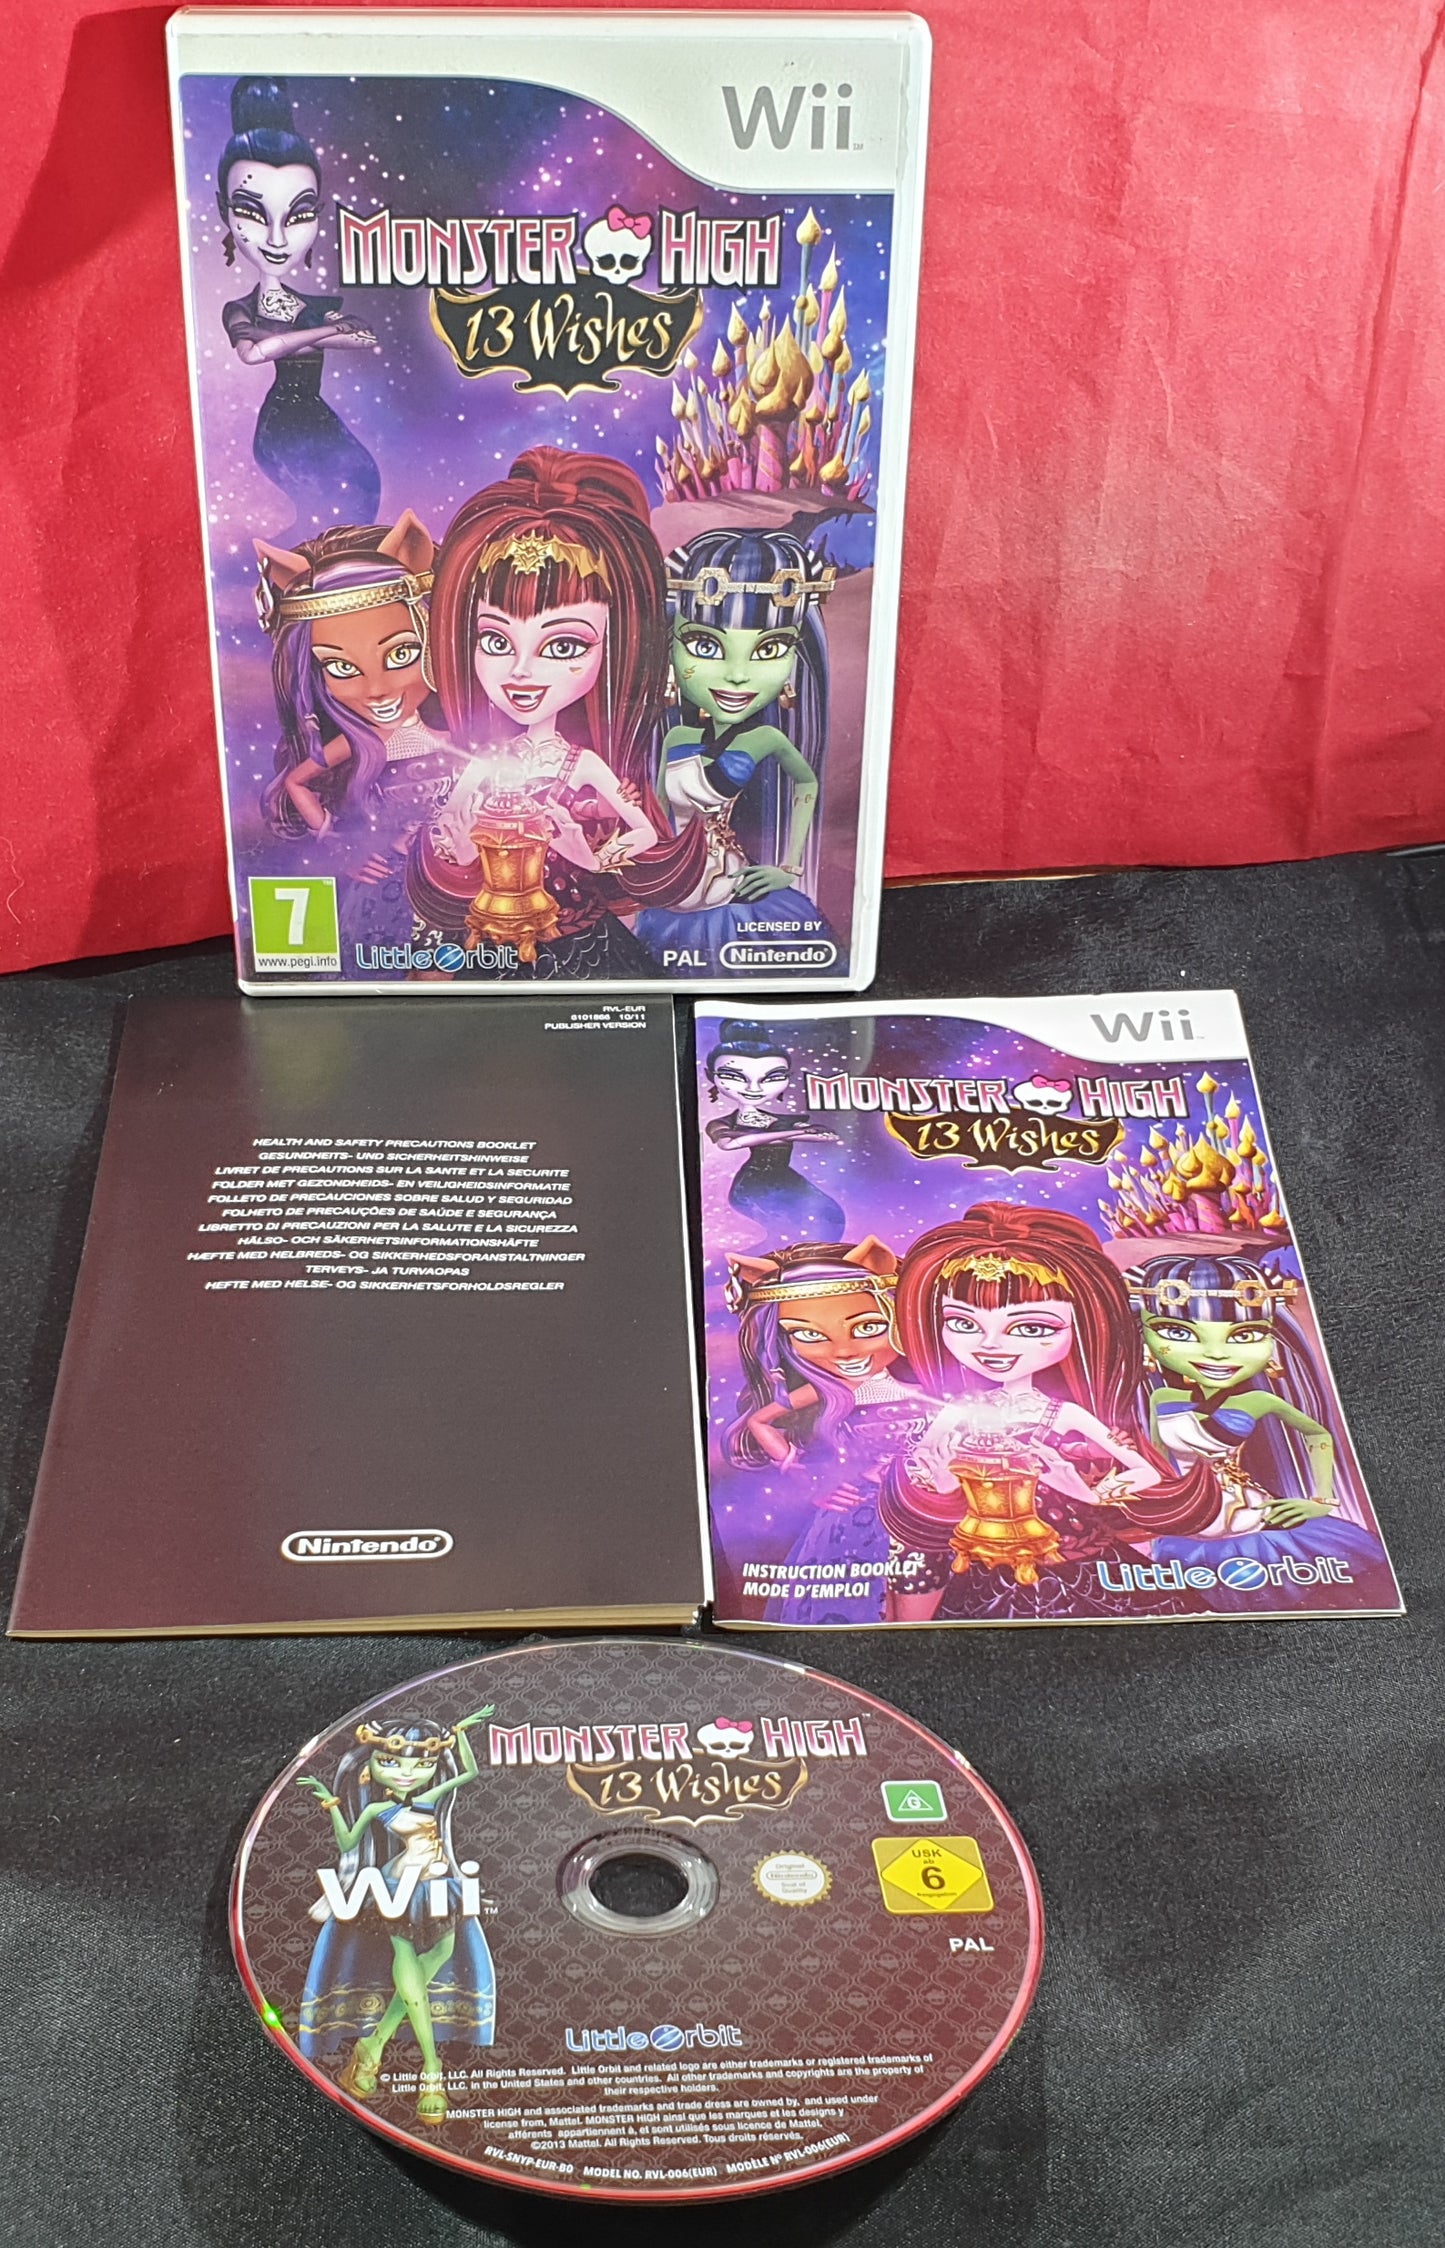 Monster High 13 Wishes Nintendo Wii Game